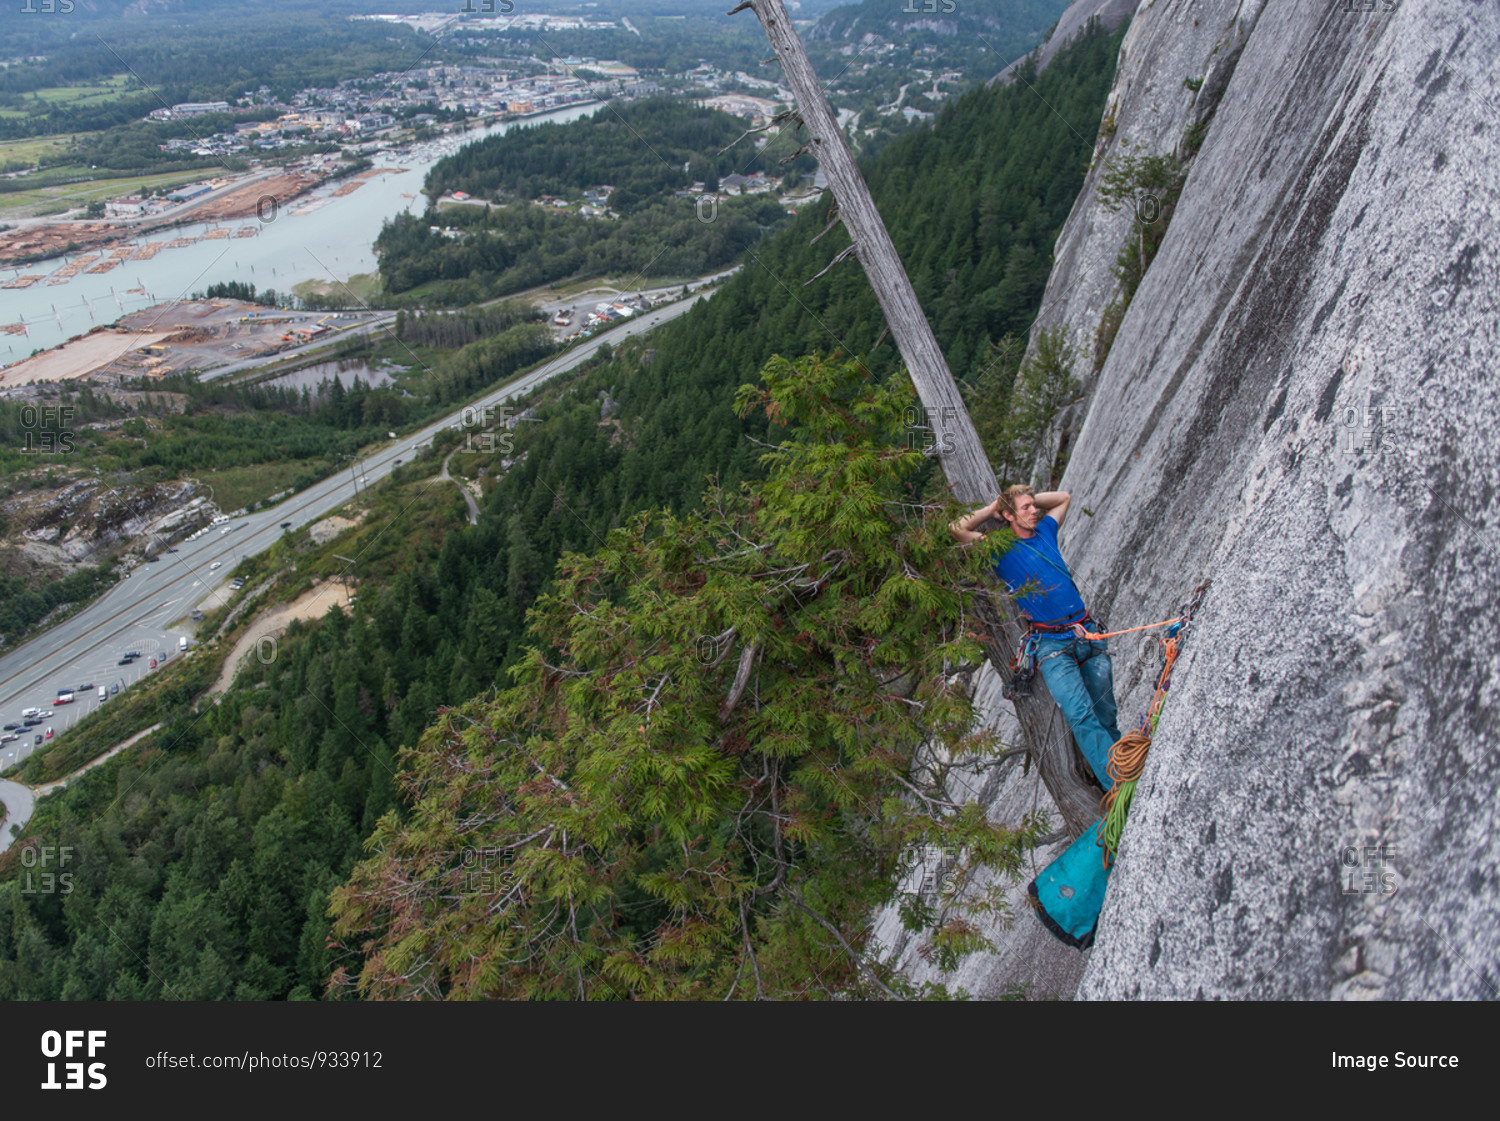 Climber sleeping leaning back on a tree growing out of the cliff face, traditional climbing, Sea to Sky corridor, Squamish